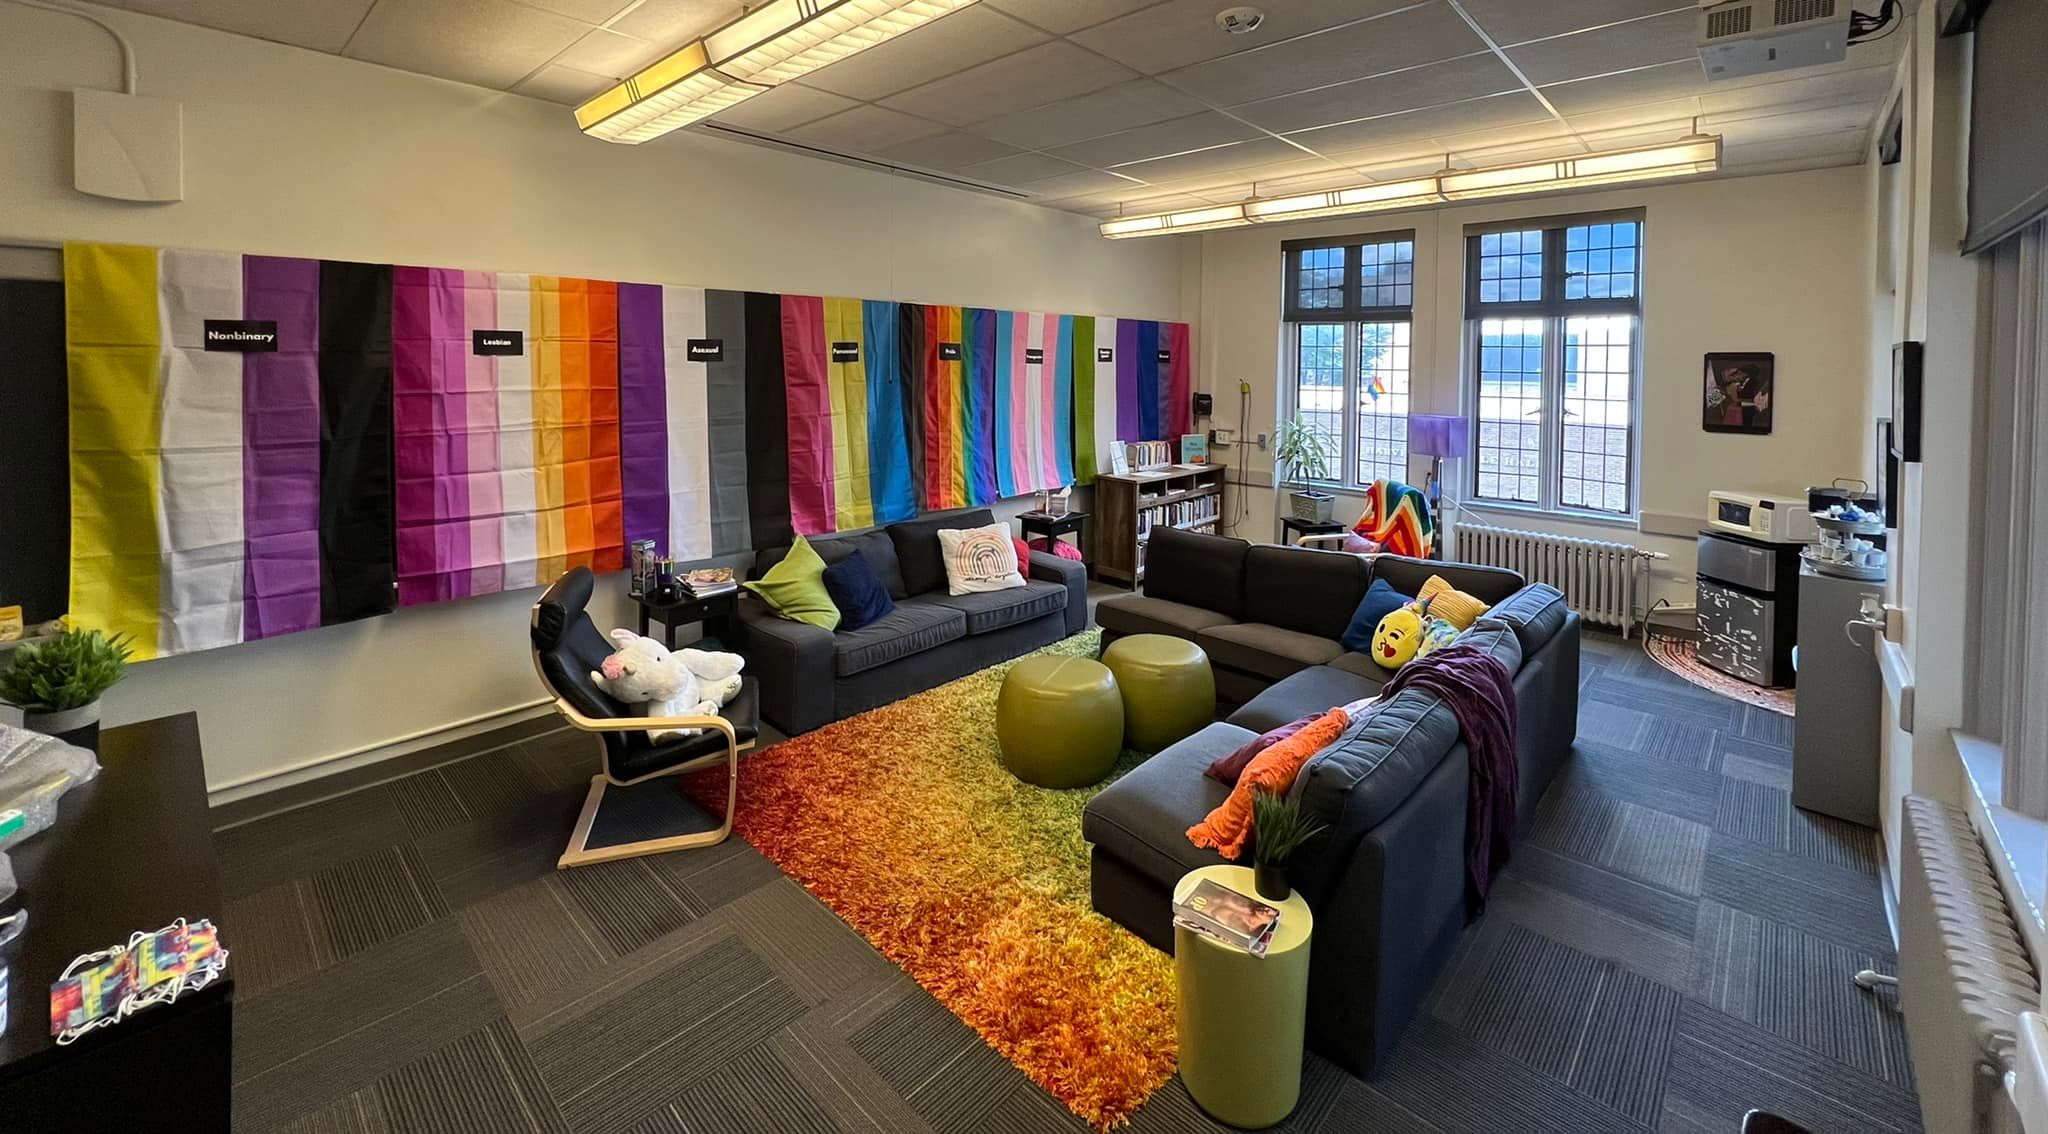 lounge with various flags on the walls, floor to ceiling windows, rainbow rug, and couches